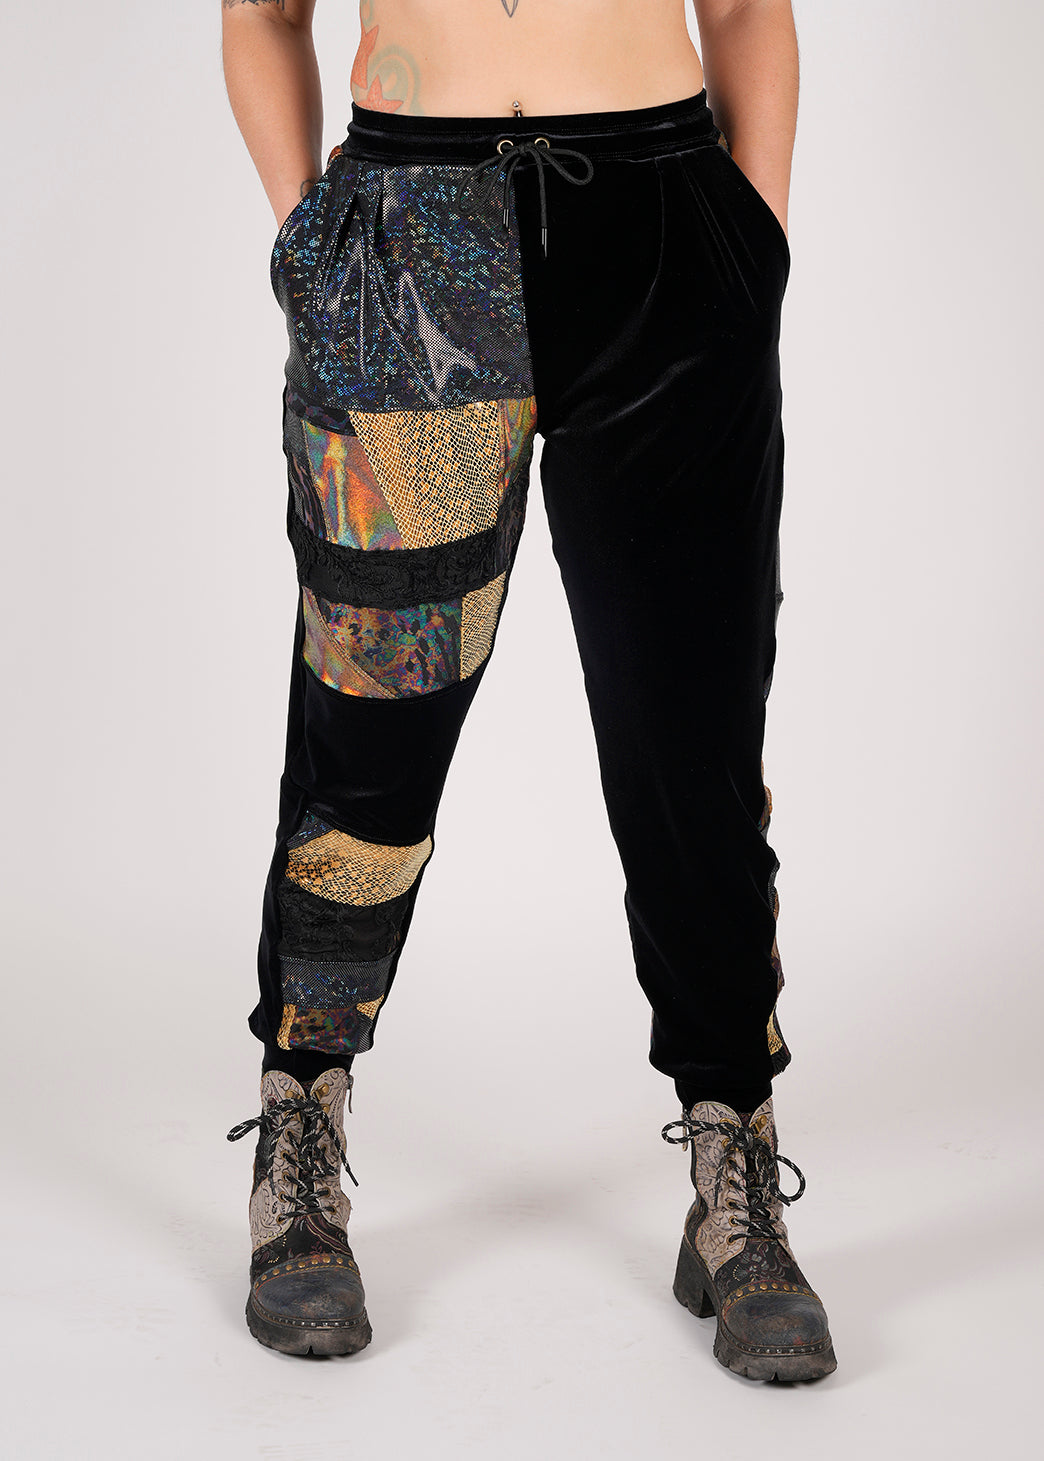 Unisex-music fesival fashion - Festival-outfit-rave-outfit - handmade-in-Brooklyn-New York City-custom made-waste conscious– retro style – hippie fashion –festival pants – rave pants – patchwork- waste conscious – upcycled – sustainable design – one of a kind – handmade – luxe velvet – eco friendly 